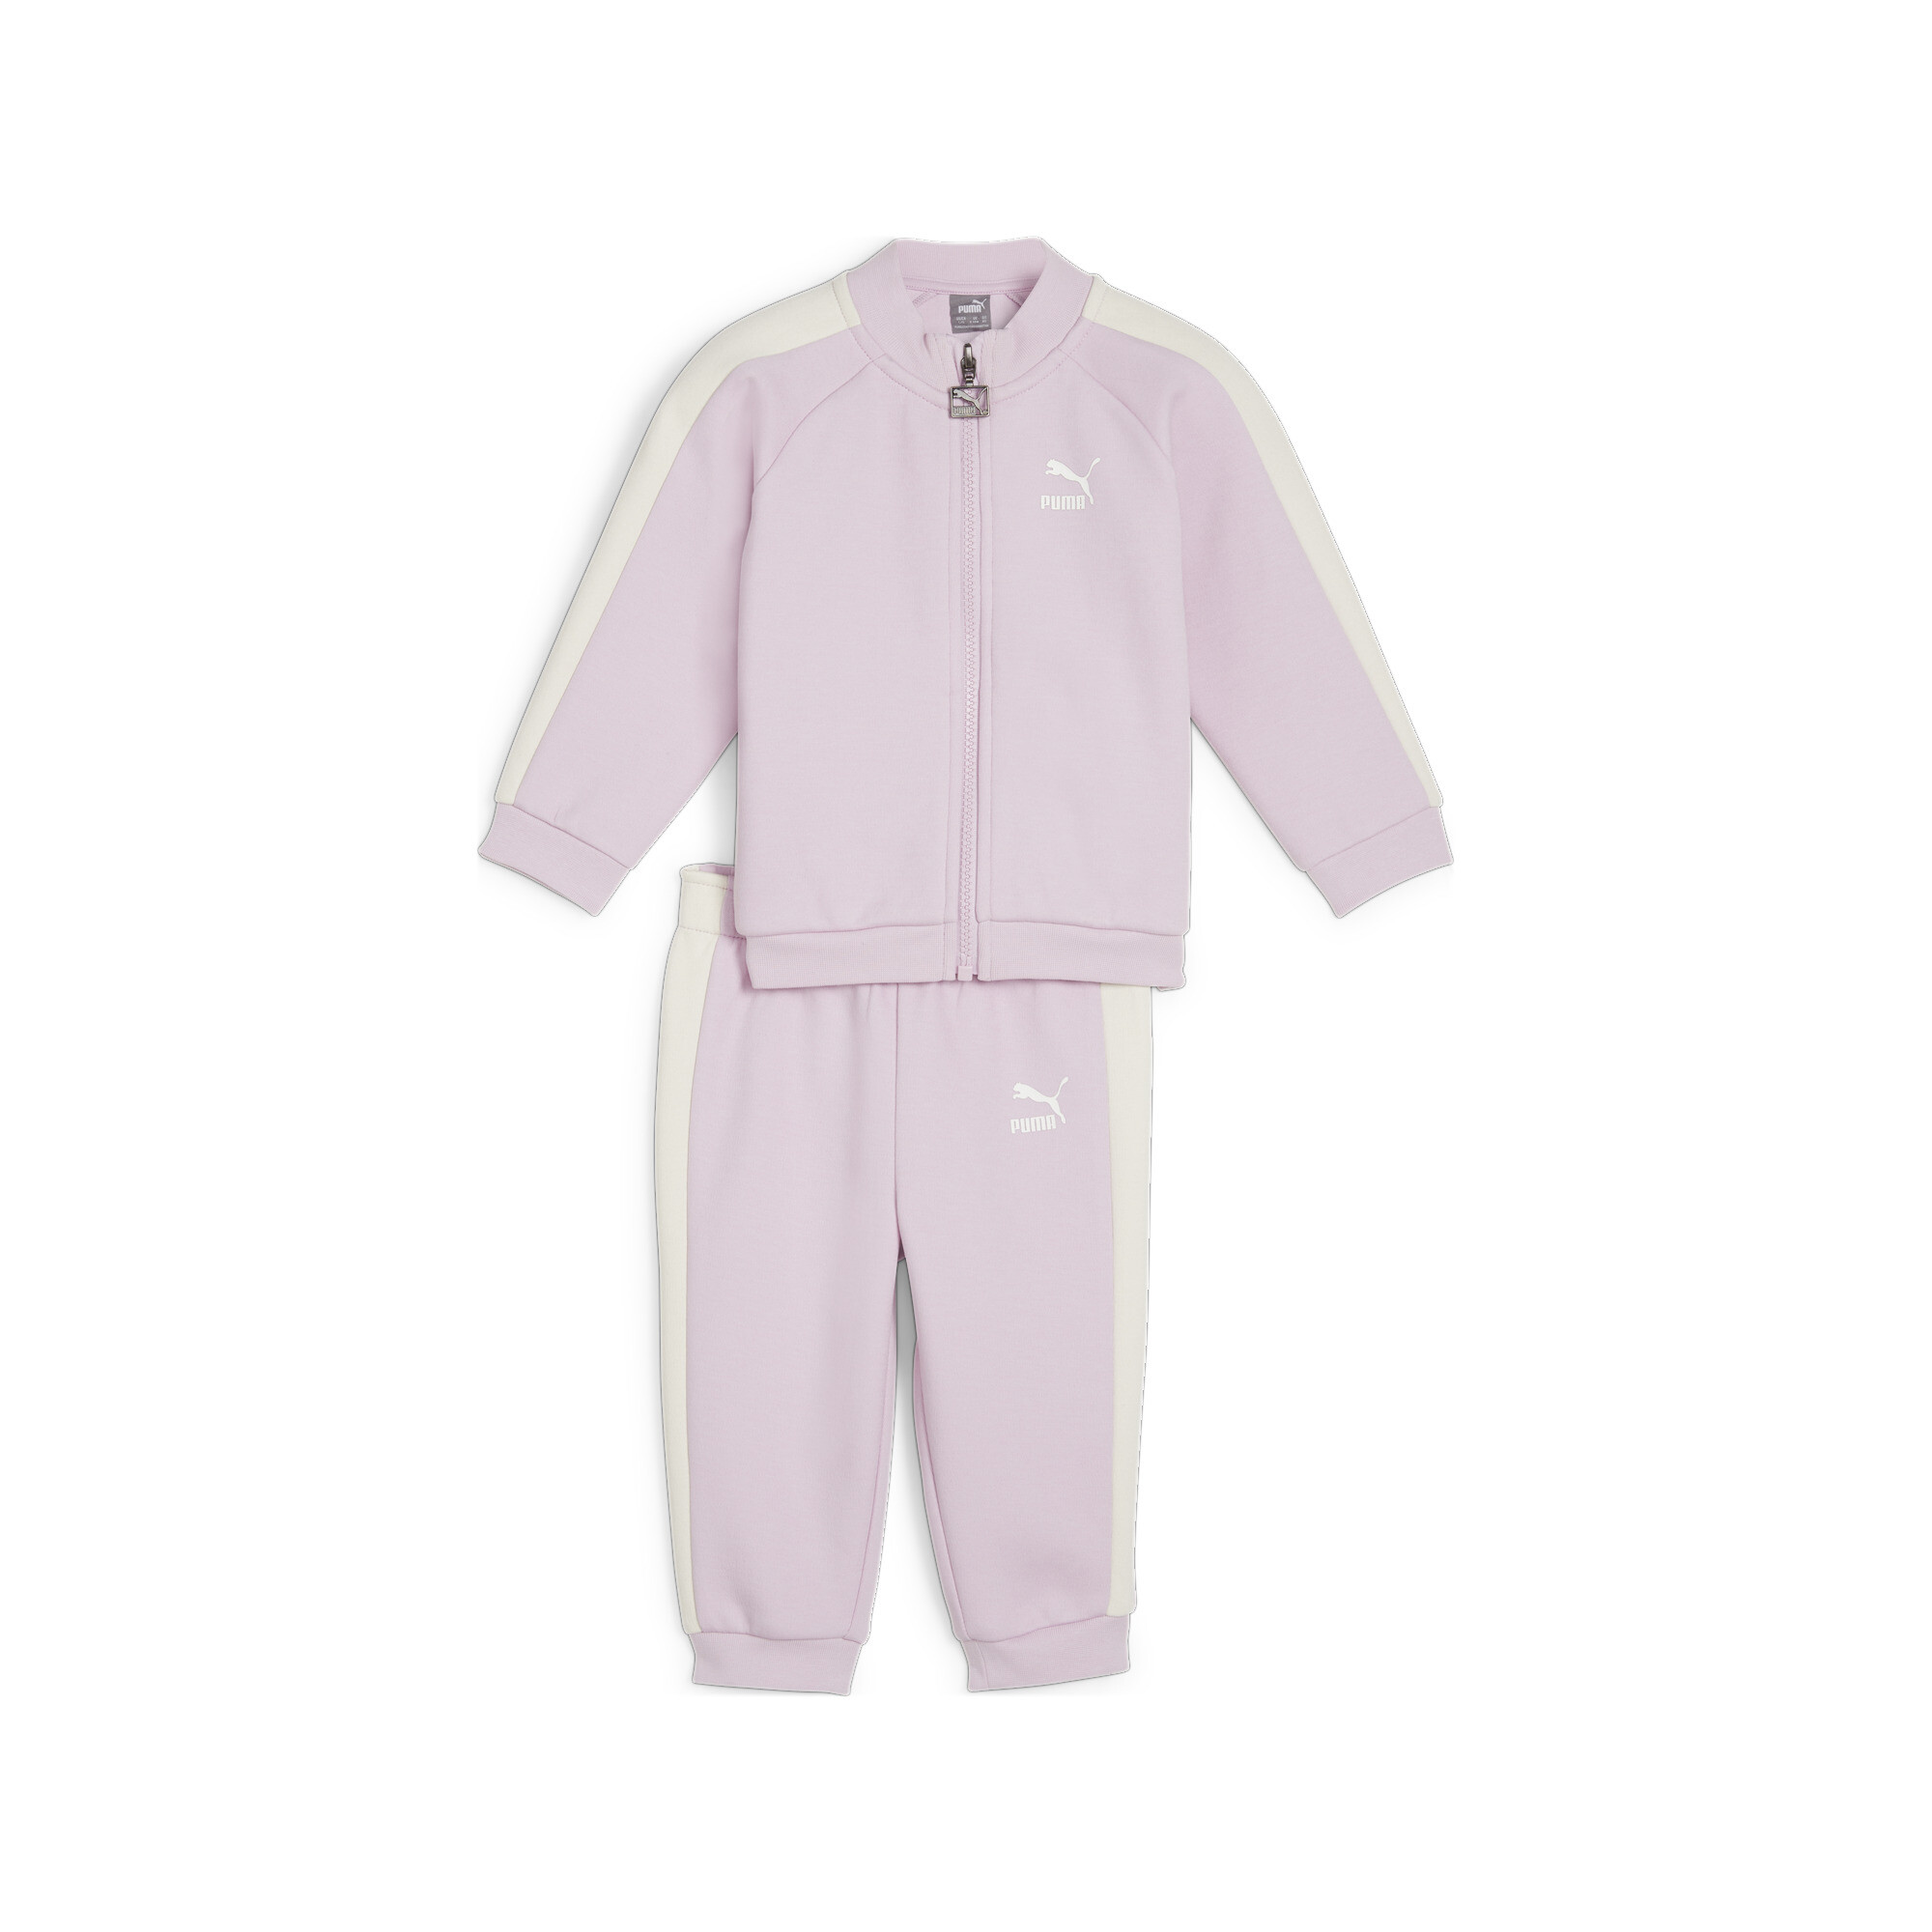 Kids' PUMA MINICATS T7 ICONIC Baby Tracksuit Set In 90 - Purple, Size 2-4 Months